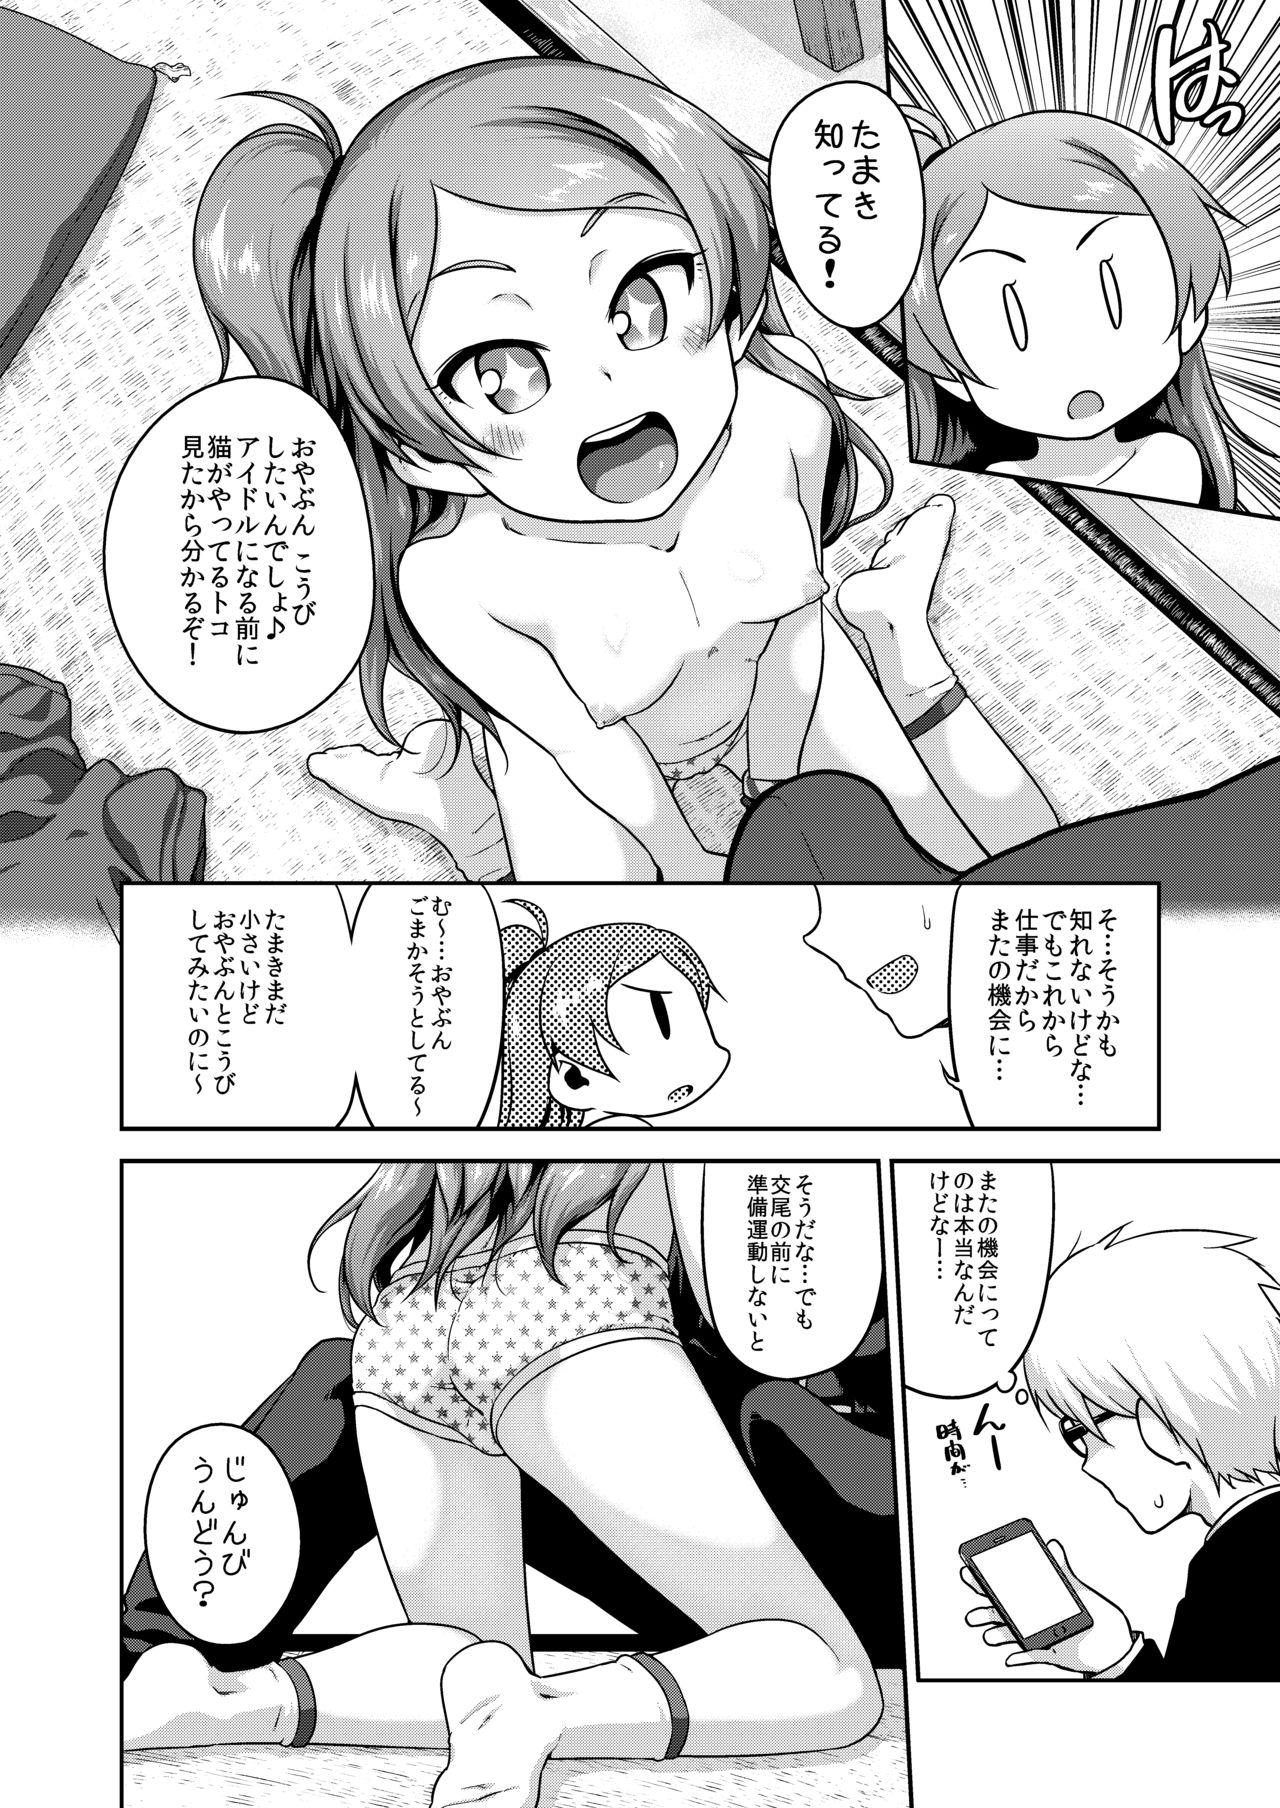 Oral Sex Bouncing - The idolmaster Puba - Page 3